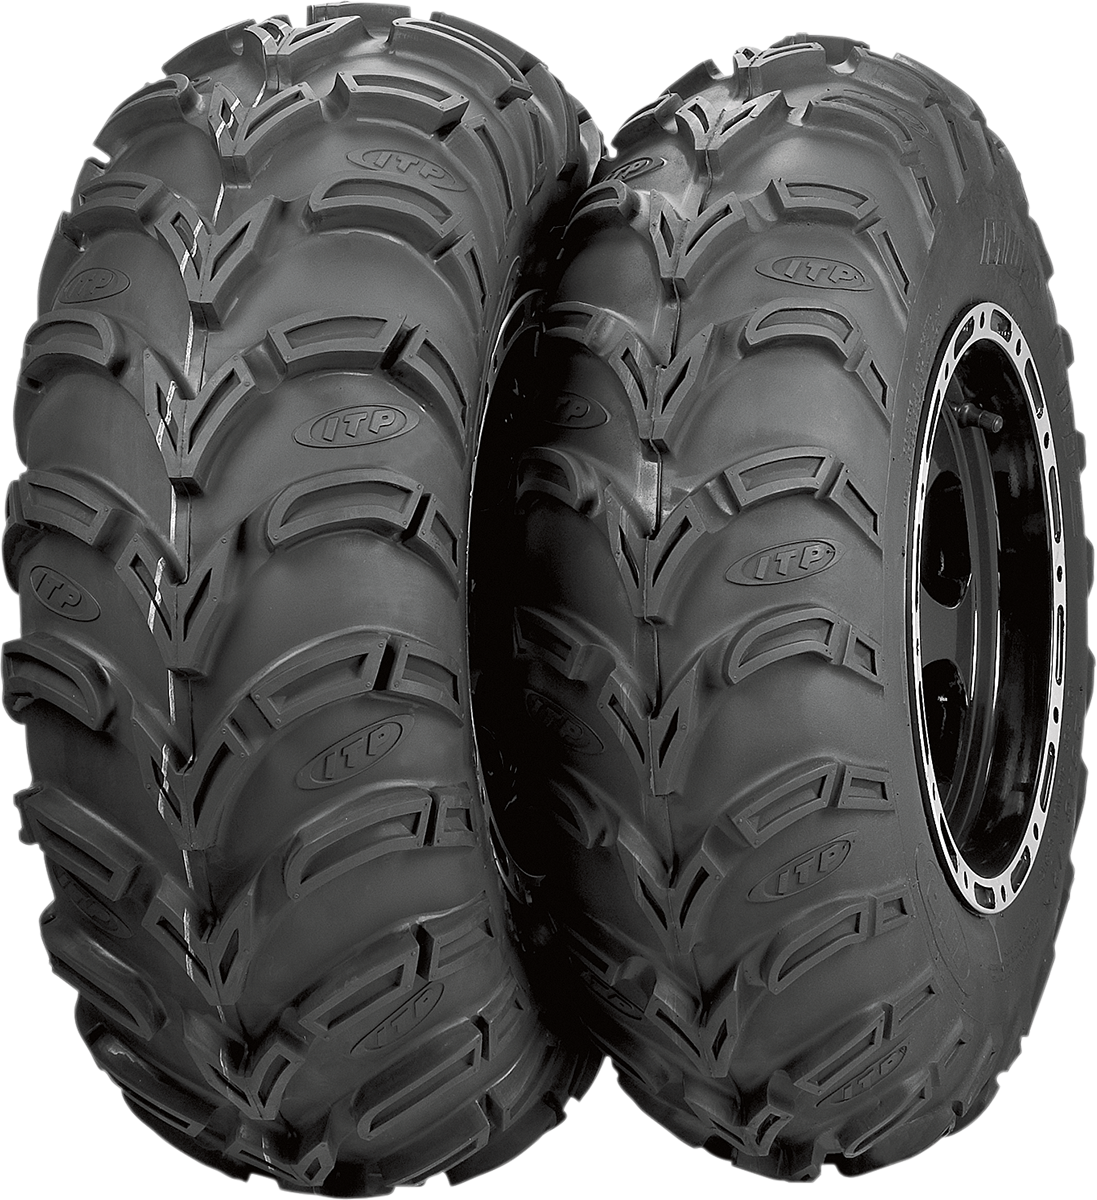 ITP Tire - Mud Lite AT - Front/Rear - 22x11-10 - 6 Ply 56A3A5